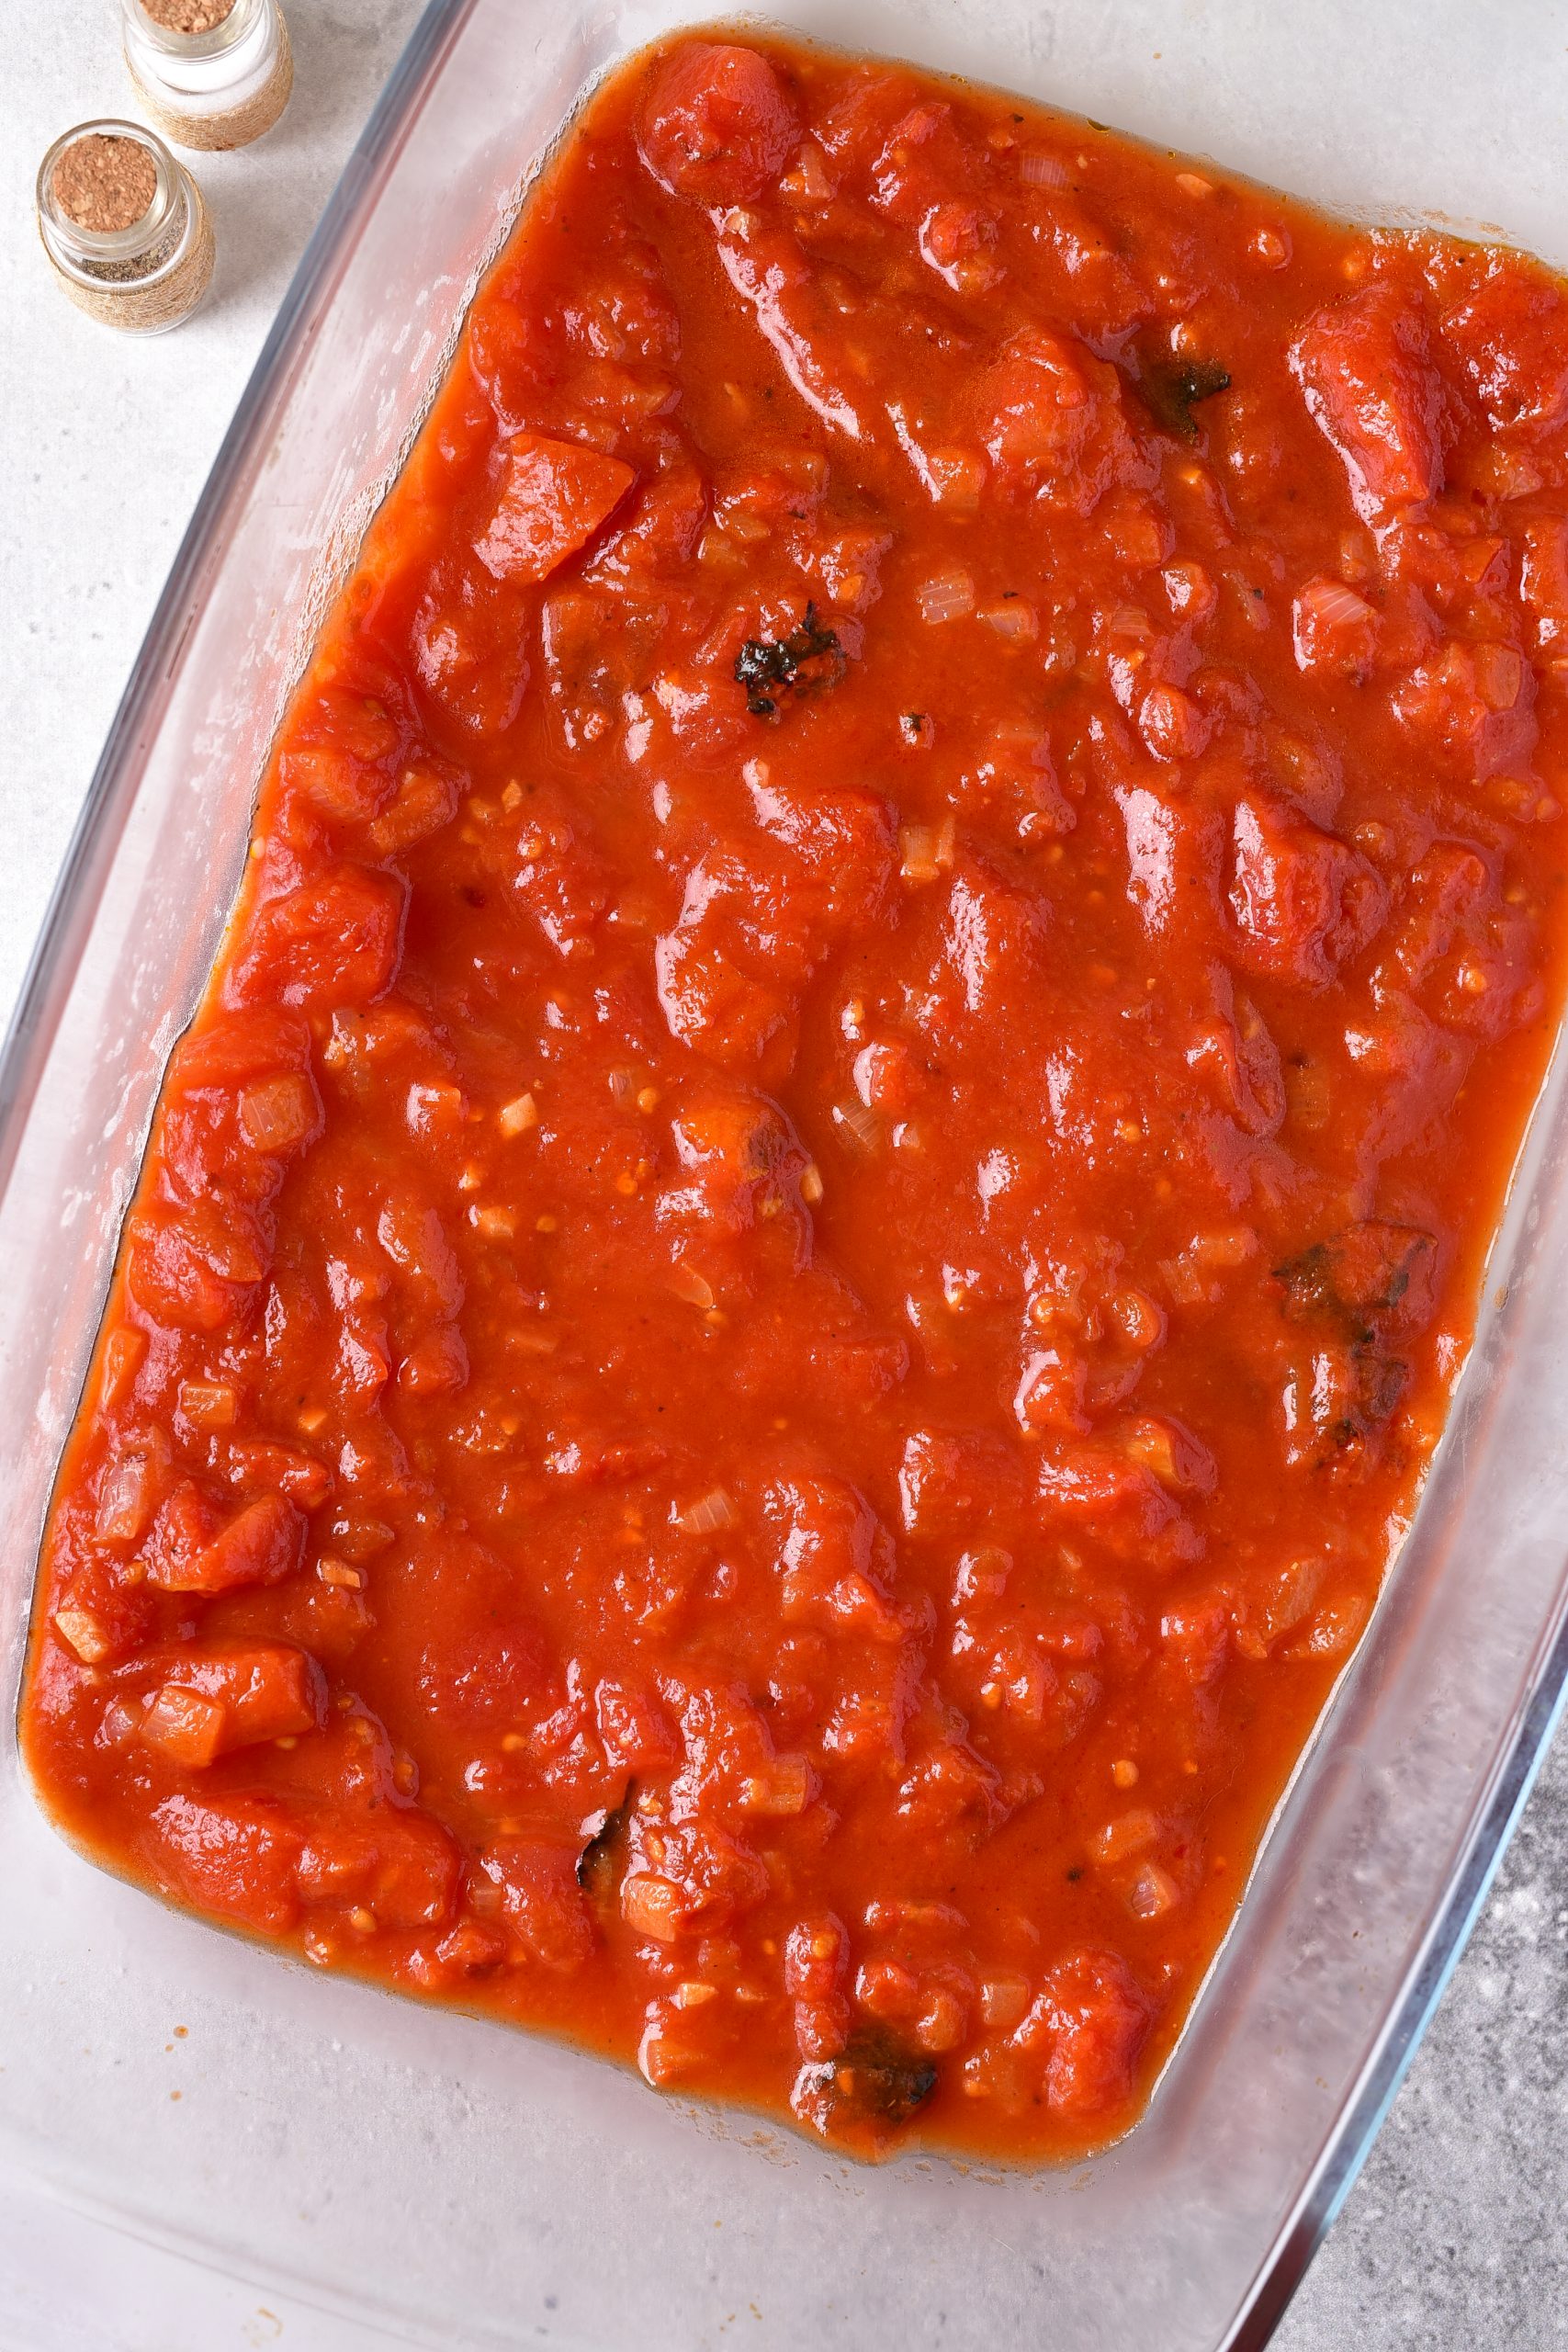 Layer ½ the sauce into a 9x13 baking dish.